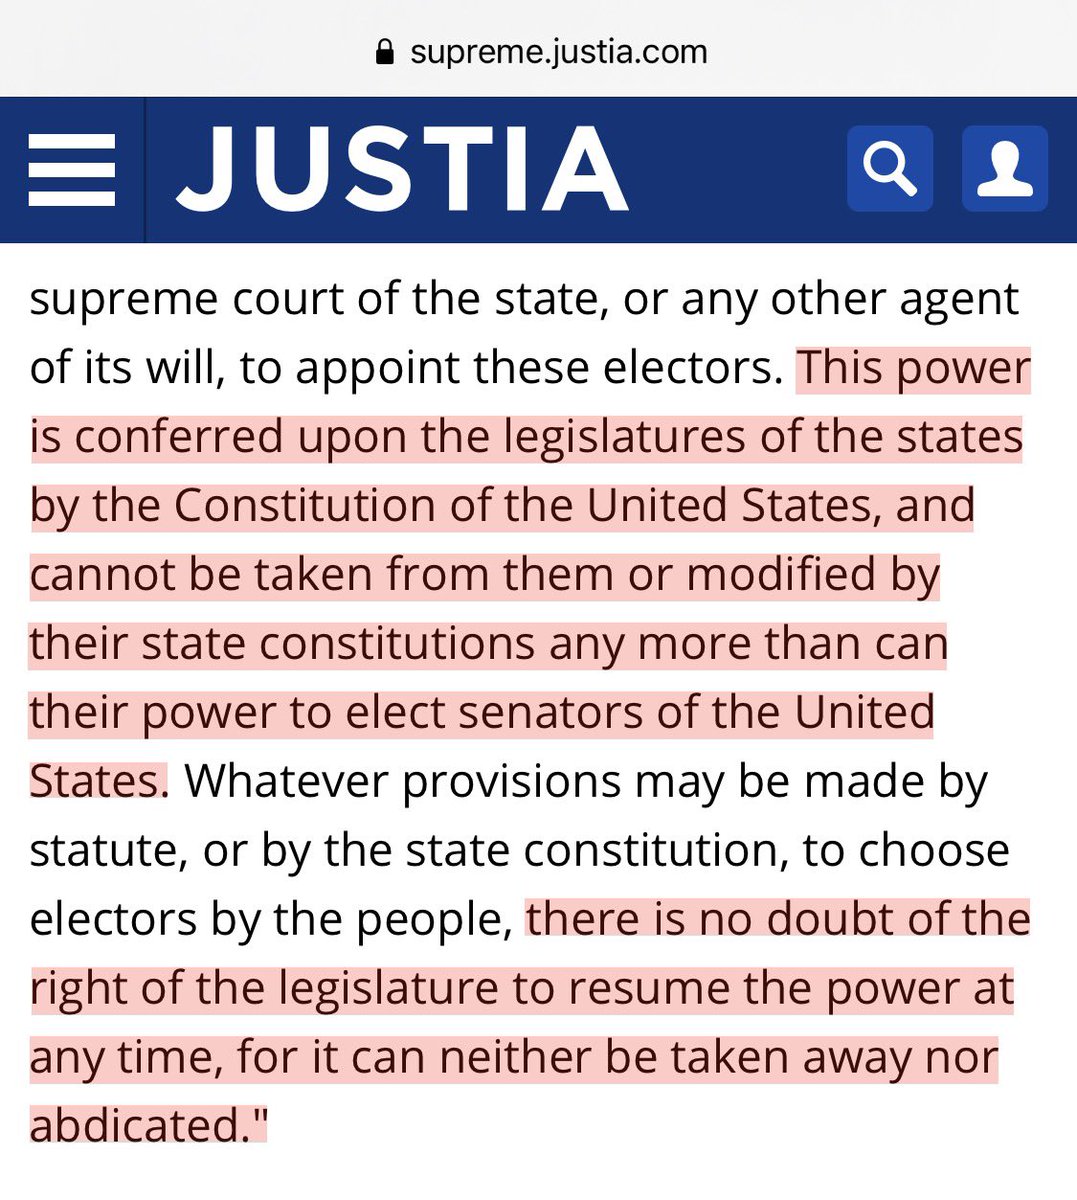 SCOTUS in McPherson held that the power to appoint electors belonged exclusively to state legislatures, and they can exercise it whenever they see fit – even after an electionHere, e.g., they favorably quote a report from the 43rd Congress compiling the history of electors:  https://twitter.com/RahaSwagata/status/1332120025000394753